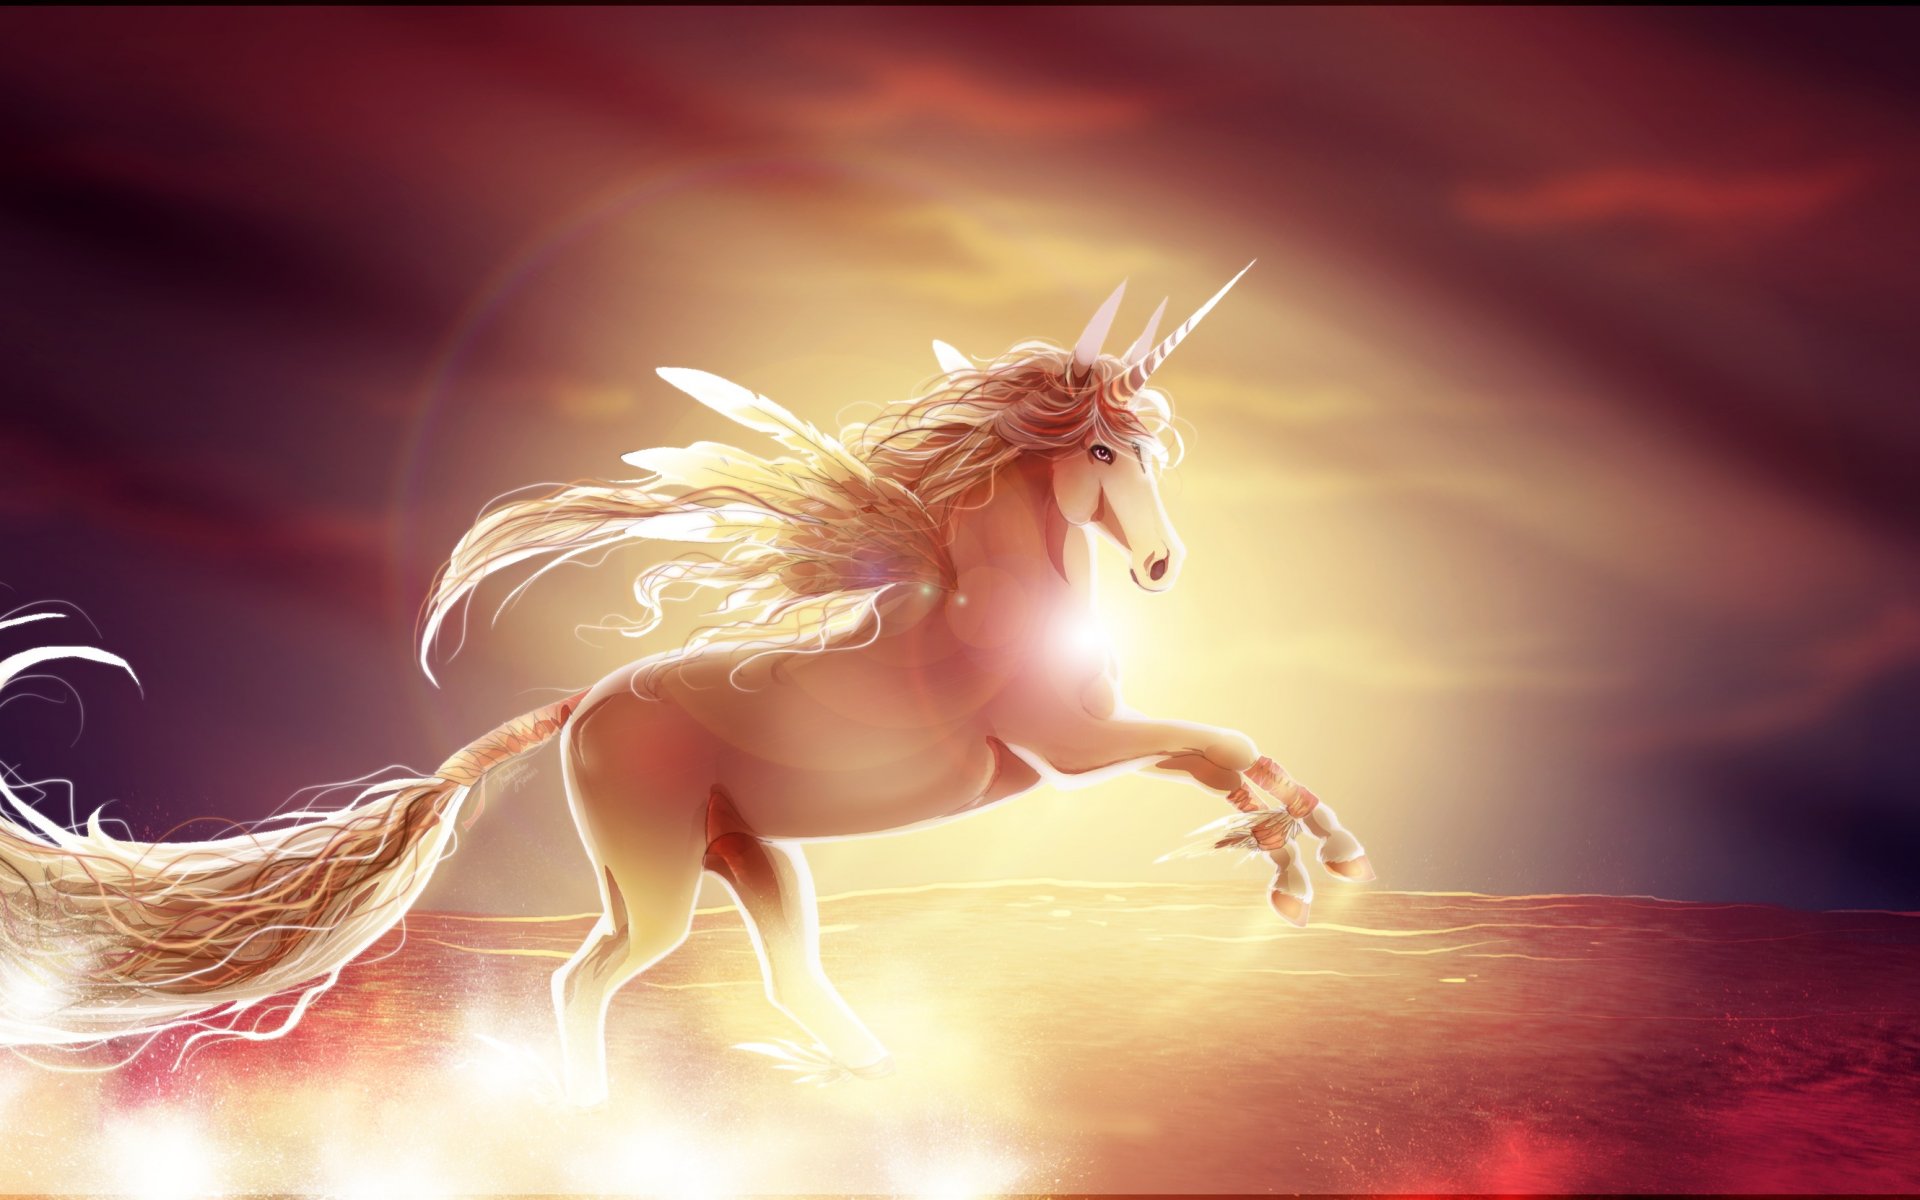 full hd pc wallpaper free download,fictional character,cg artwork,mythical creature,unicorn,sky